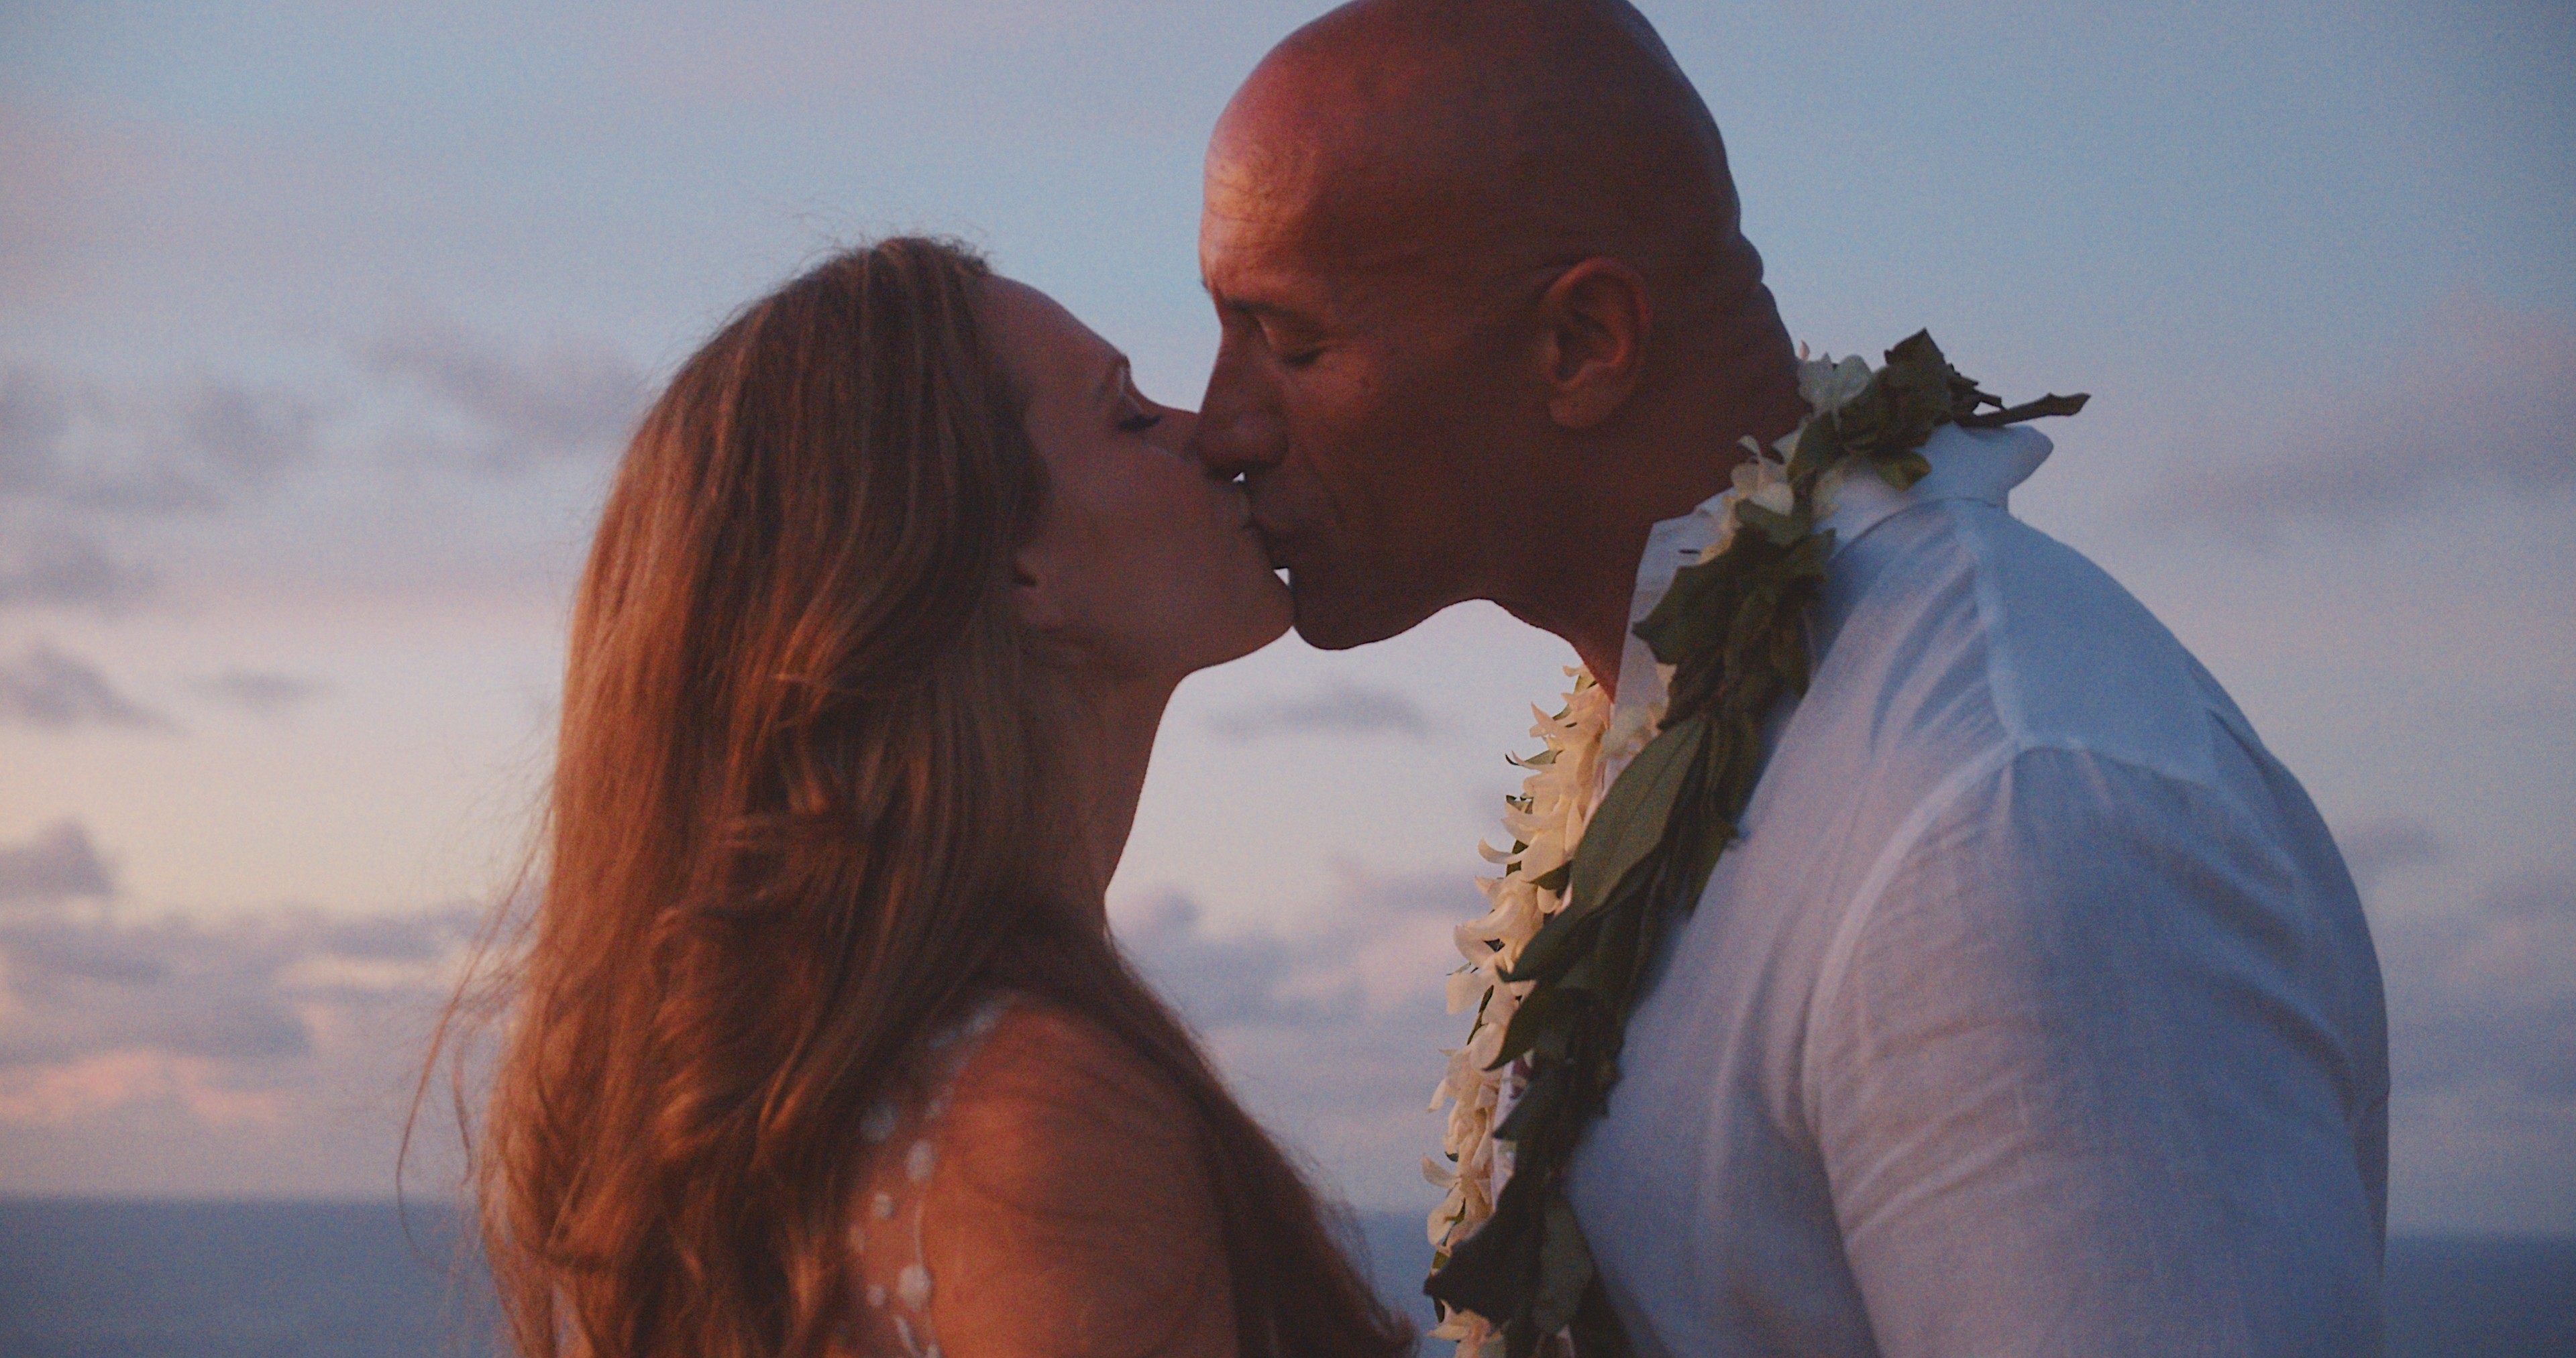 Lauren Hashian Reveals Her Love Song to Dwayne Johnson, “Step Into a Love Like This”